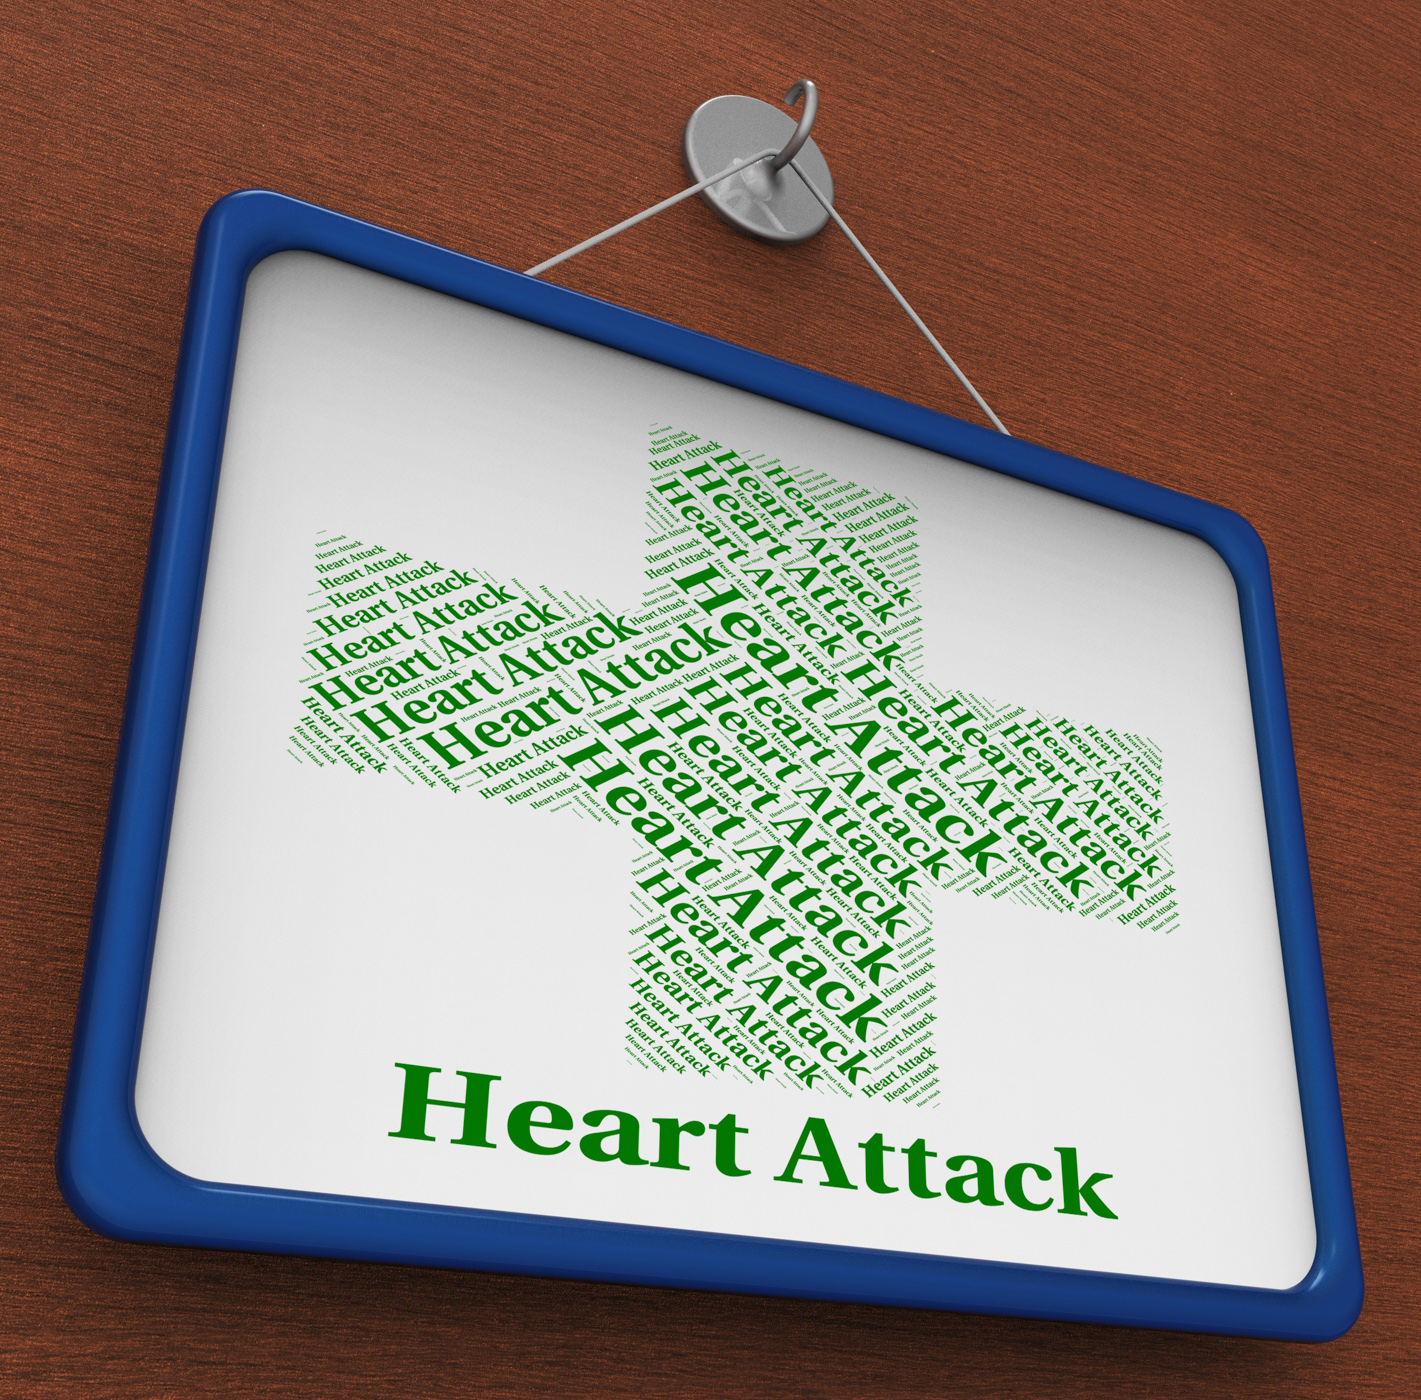 Heart attack means acute myocardial infarction and afflictions photo